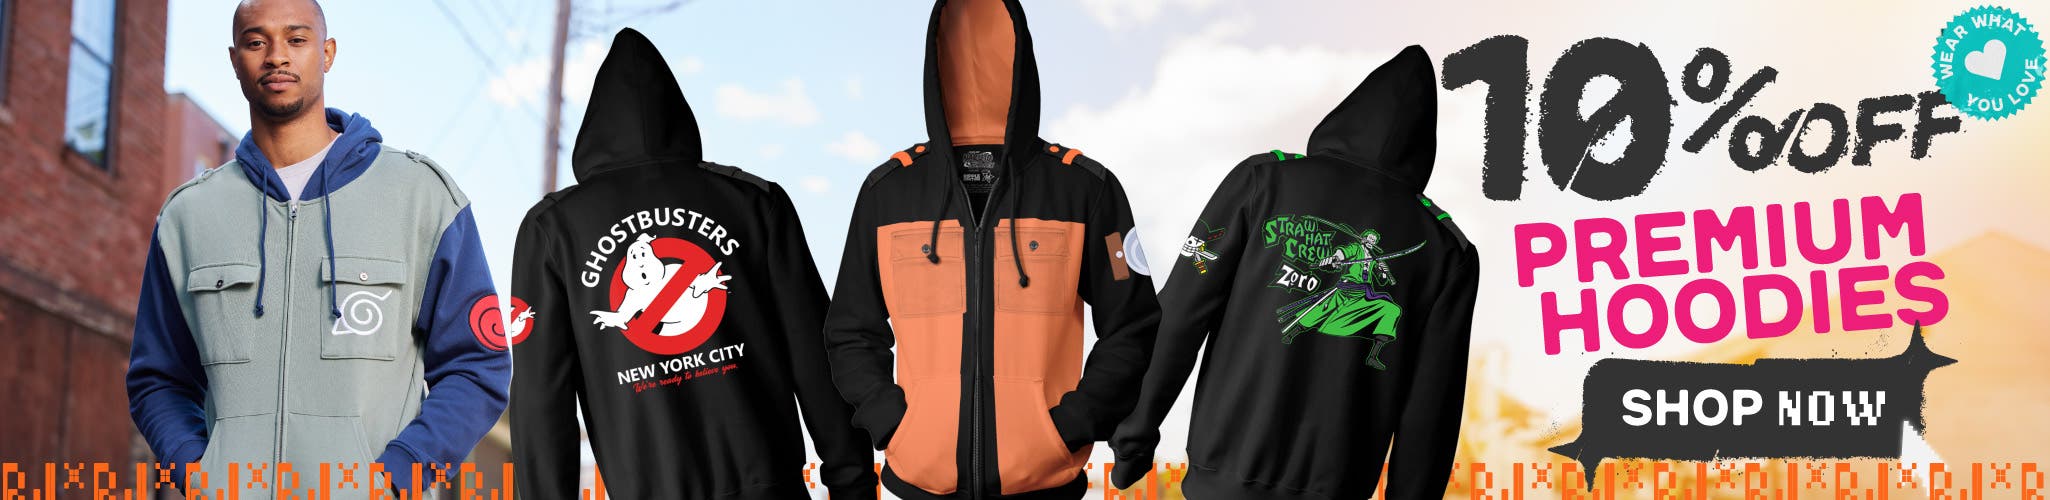 Featured Category of the Month 10% Off Premium Hoodies